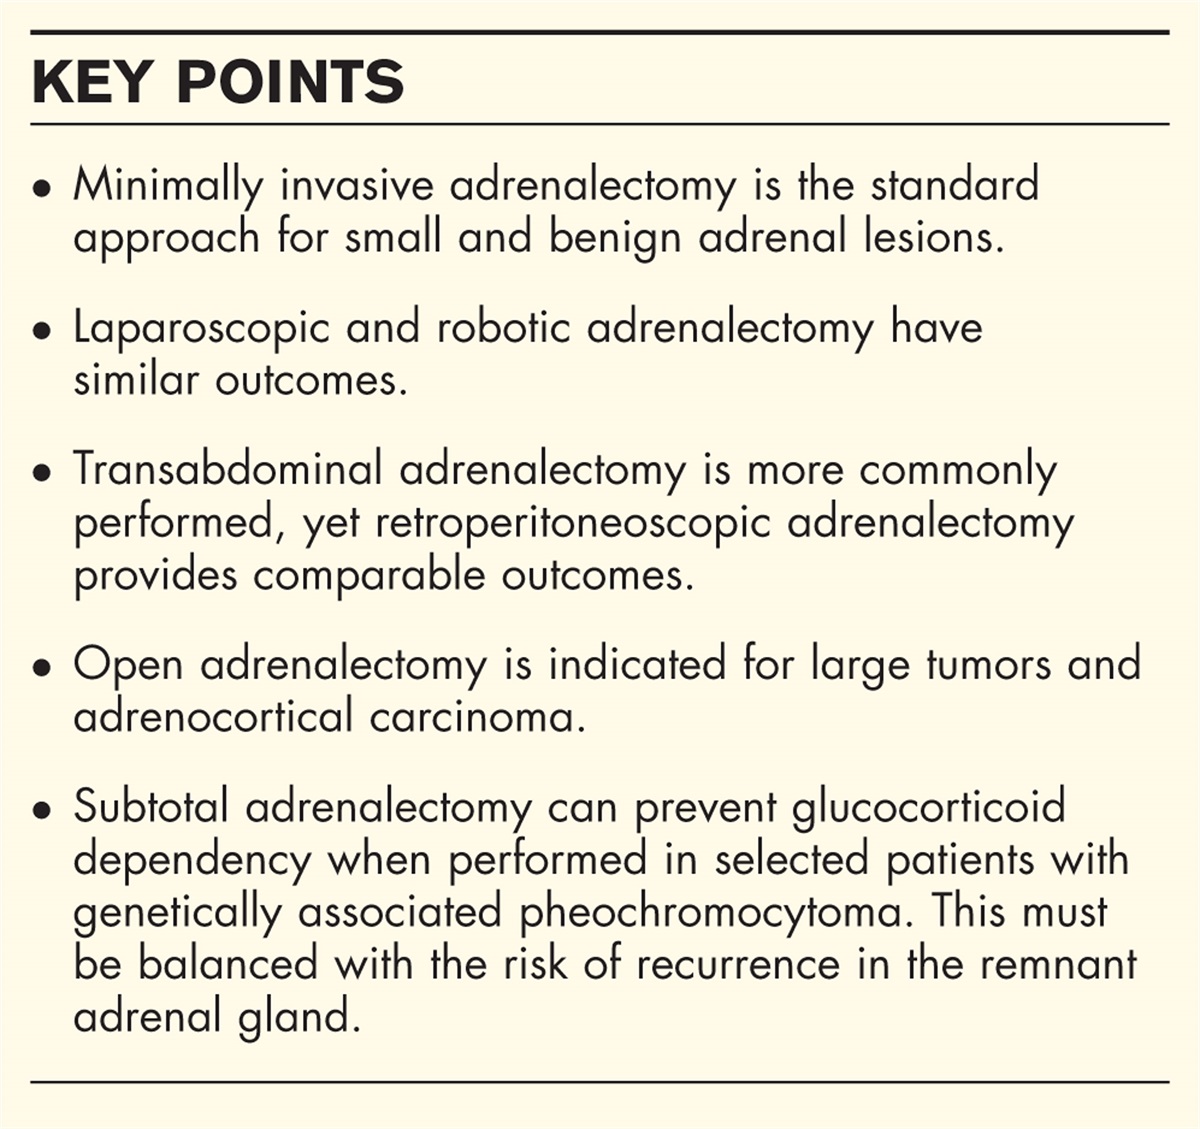 Surgical approaches to the adrenal gland